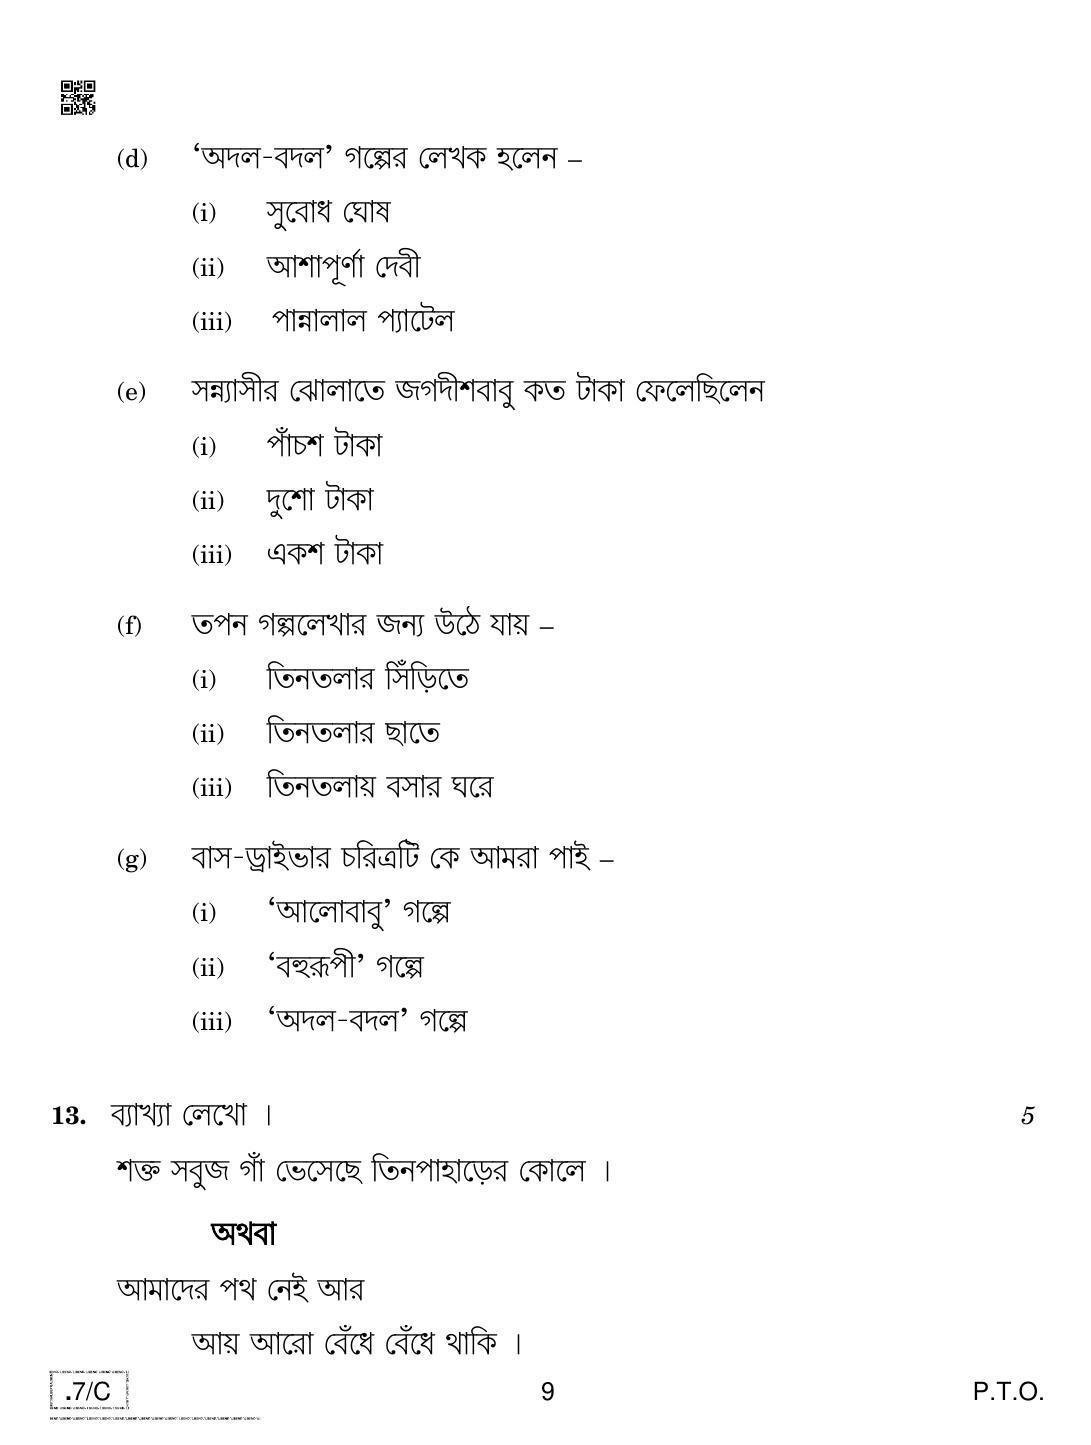 CBSE Class 10 Bengali 2020 Compartment Question Paper - Page 9